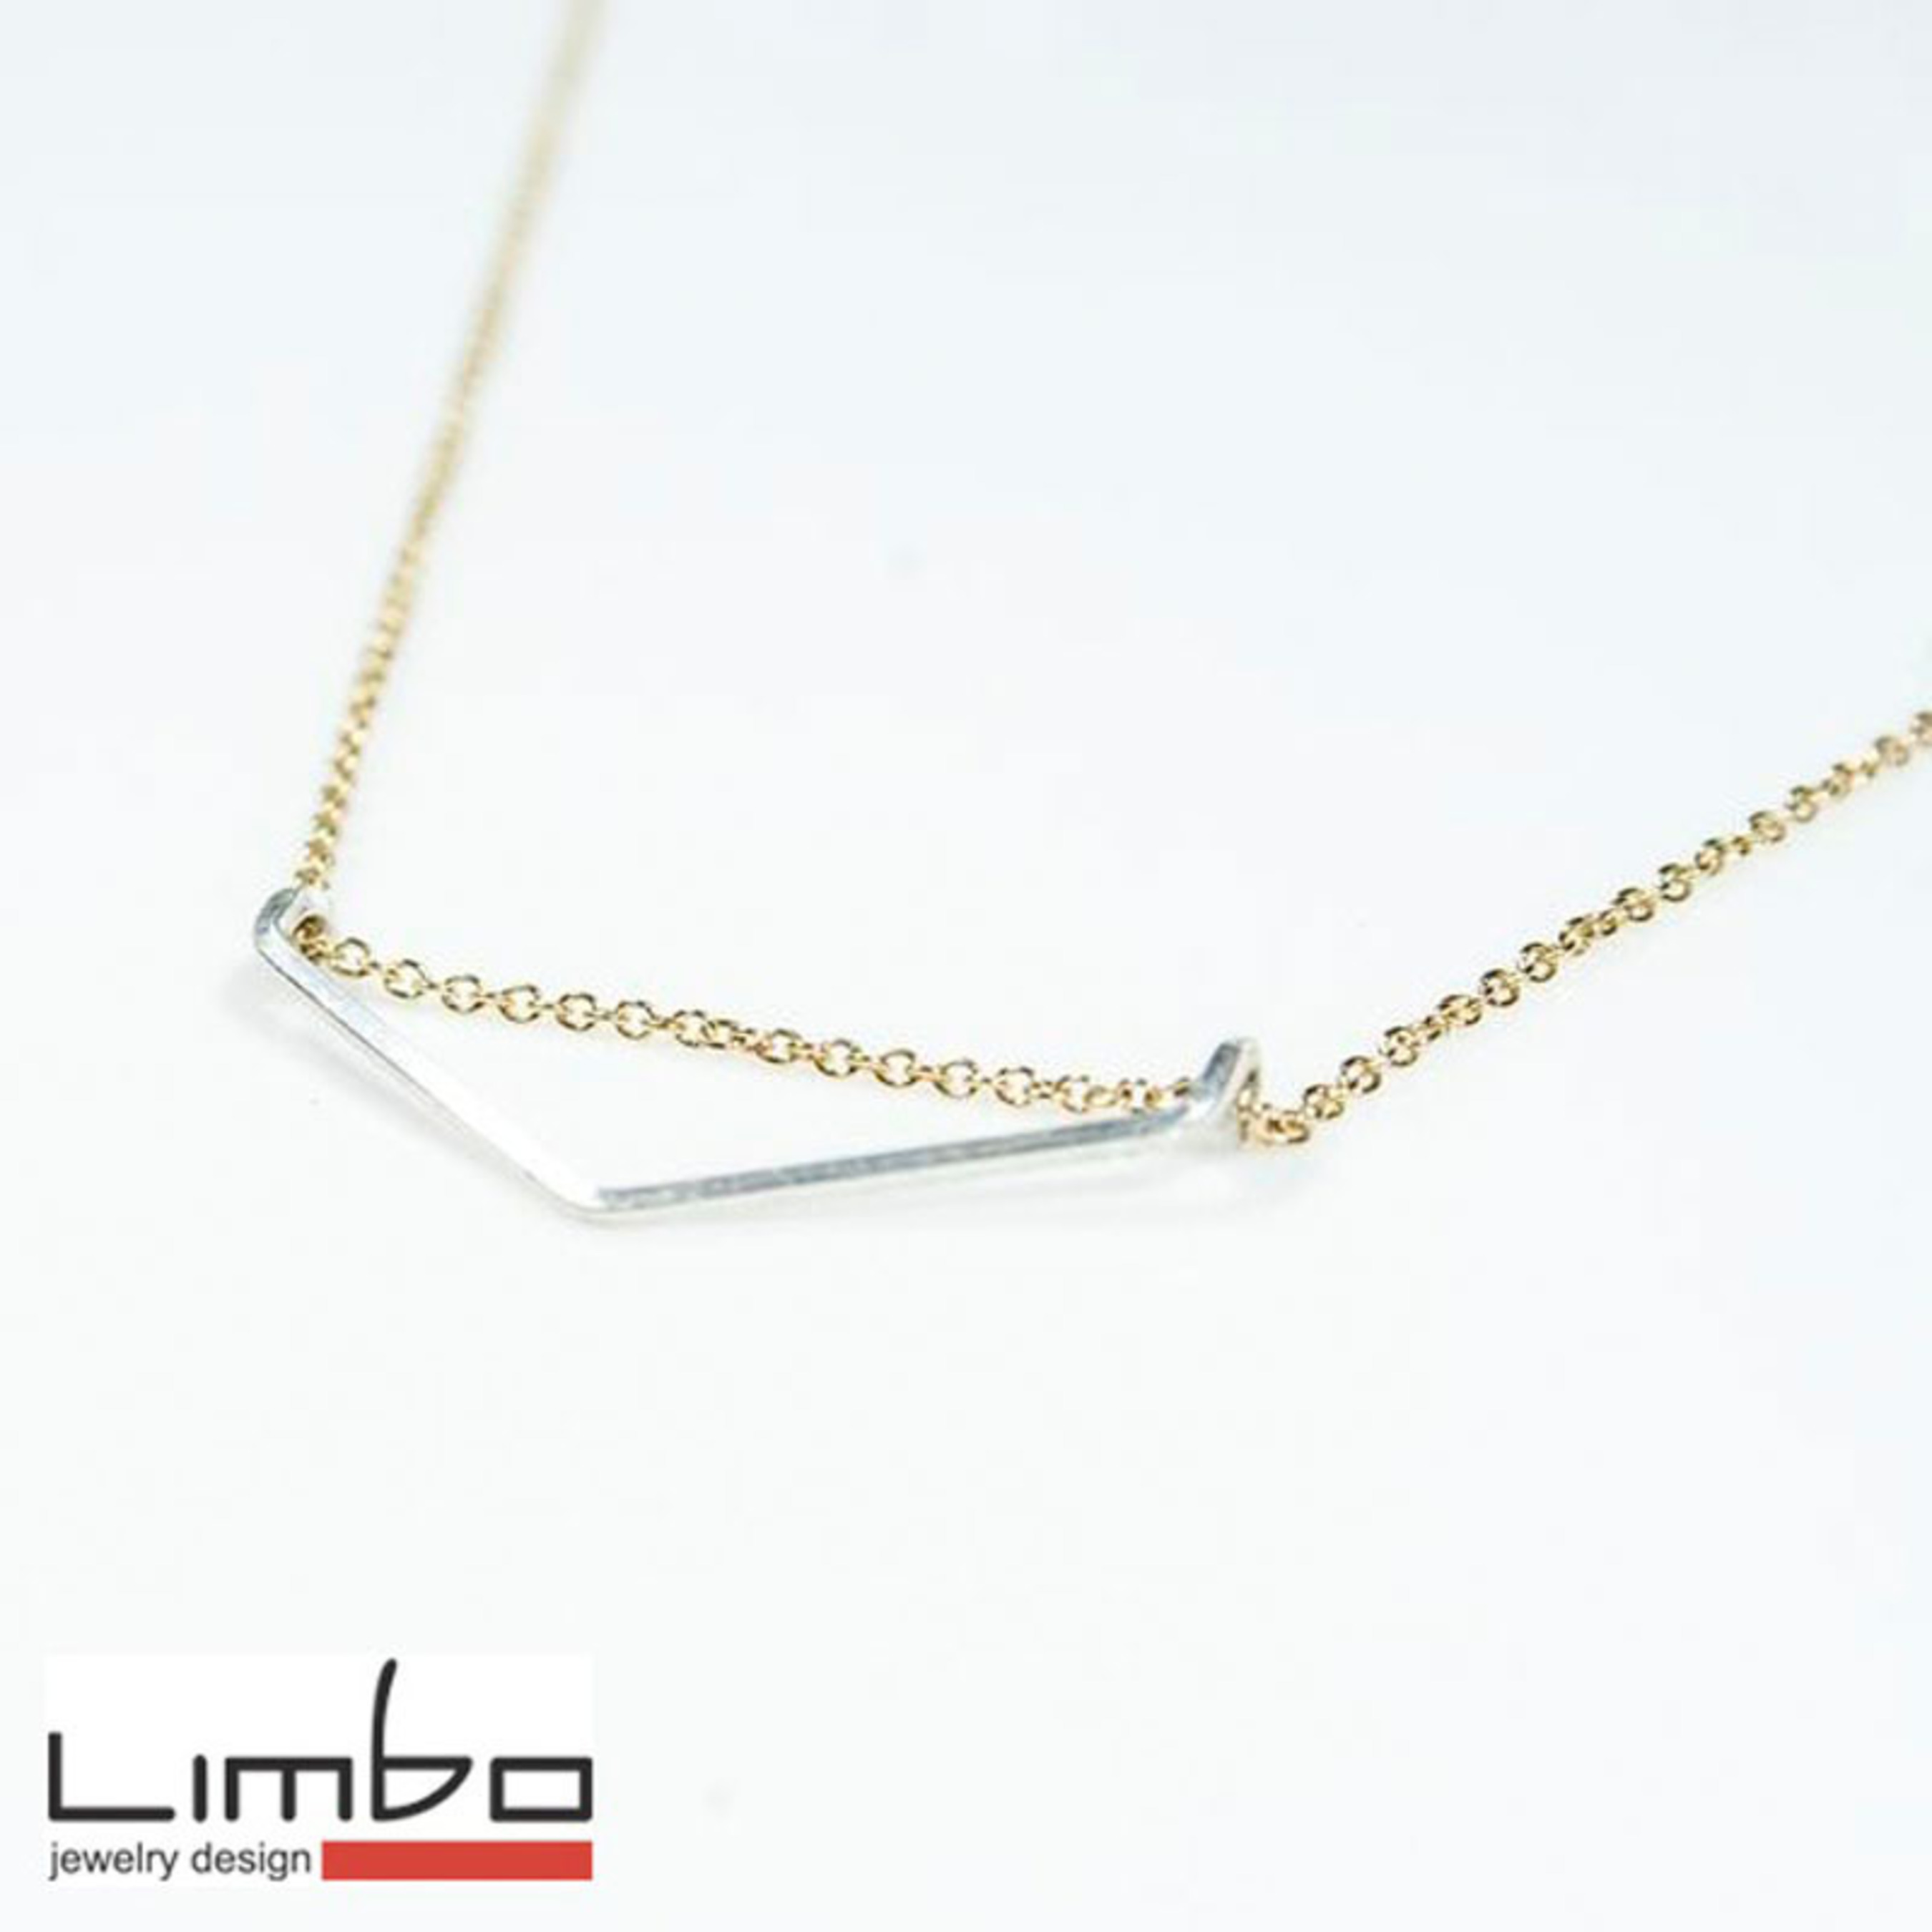 The Limited Edition Colab Collection will be available January 14th through Valentine's Day at Limbo Jewelry Design's South Congress store and online at limbojewelry.com. (PRNewsFoto/Limbo Jewelry Design) (PRNewsFoto/LIMBO JEWELRY DESIGN)